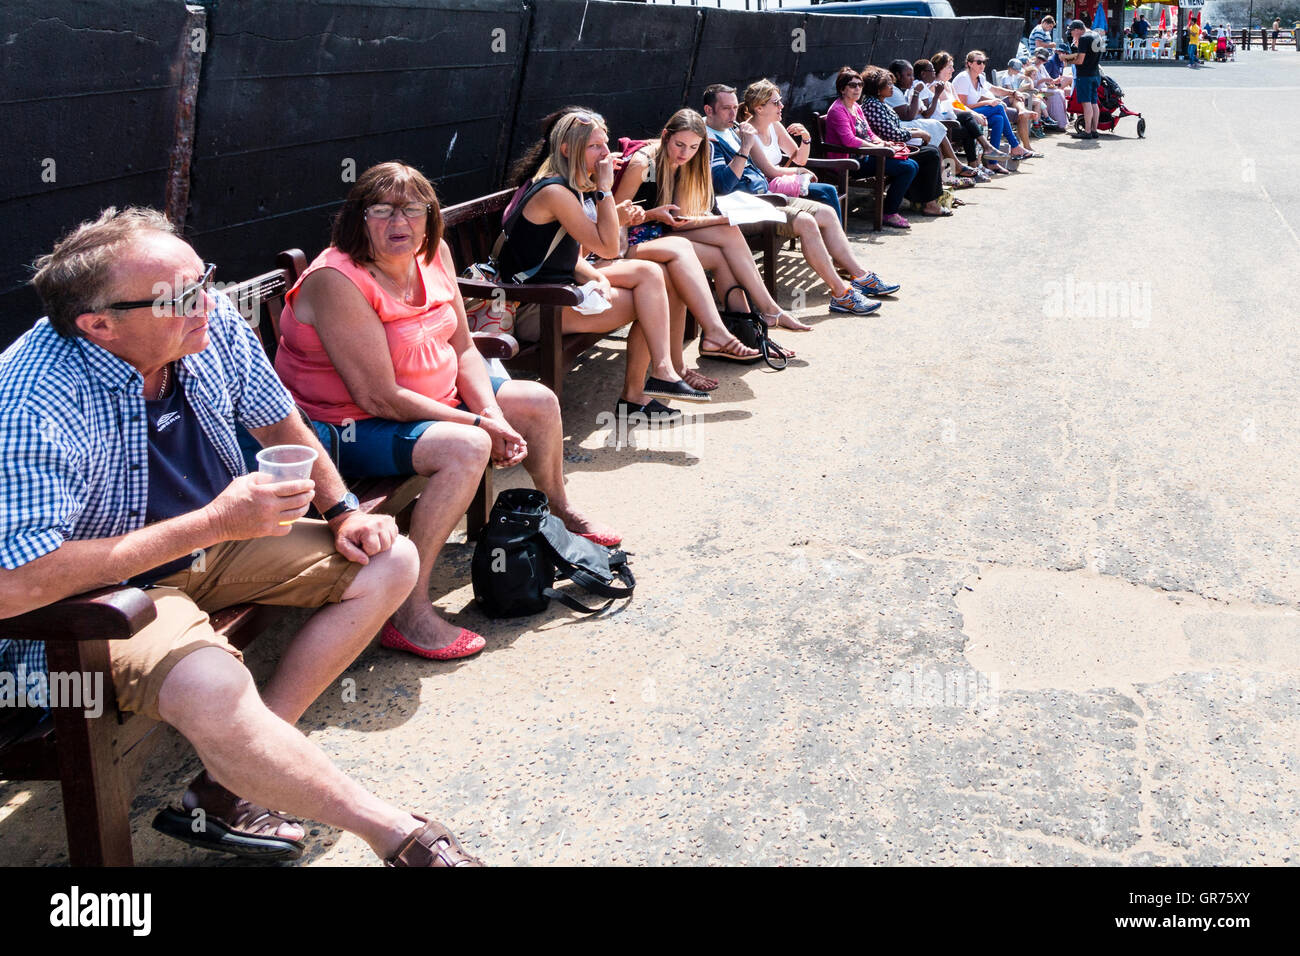 England, Broadstairs. Row of people, young and old, sitting on benches along harbour wall taking shade from the bright sunshine on a hot summer's day. Stock Photo